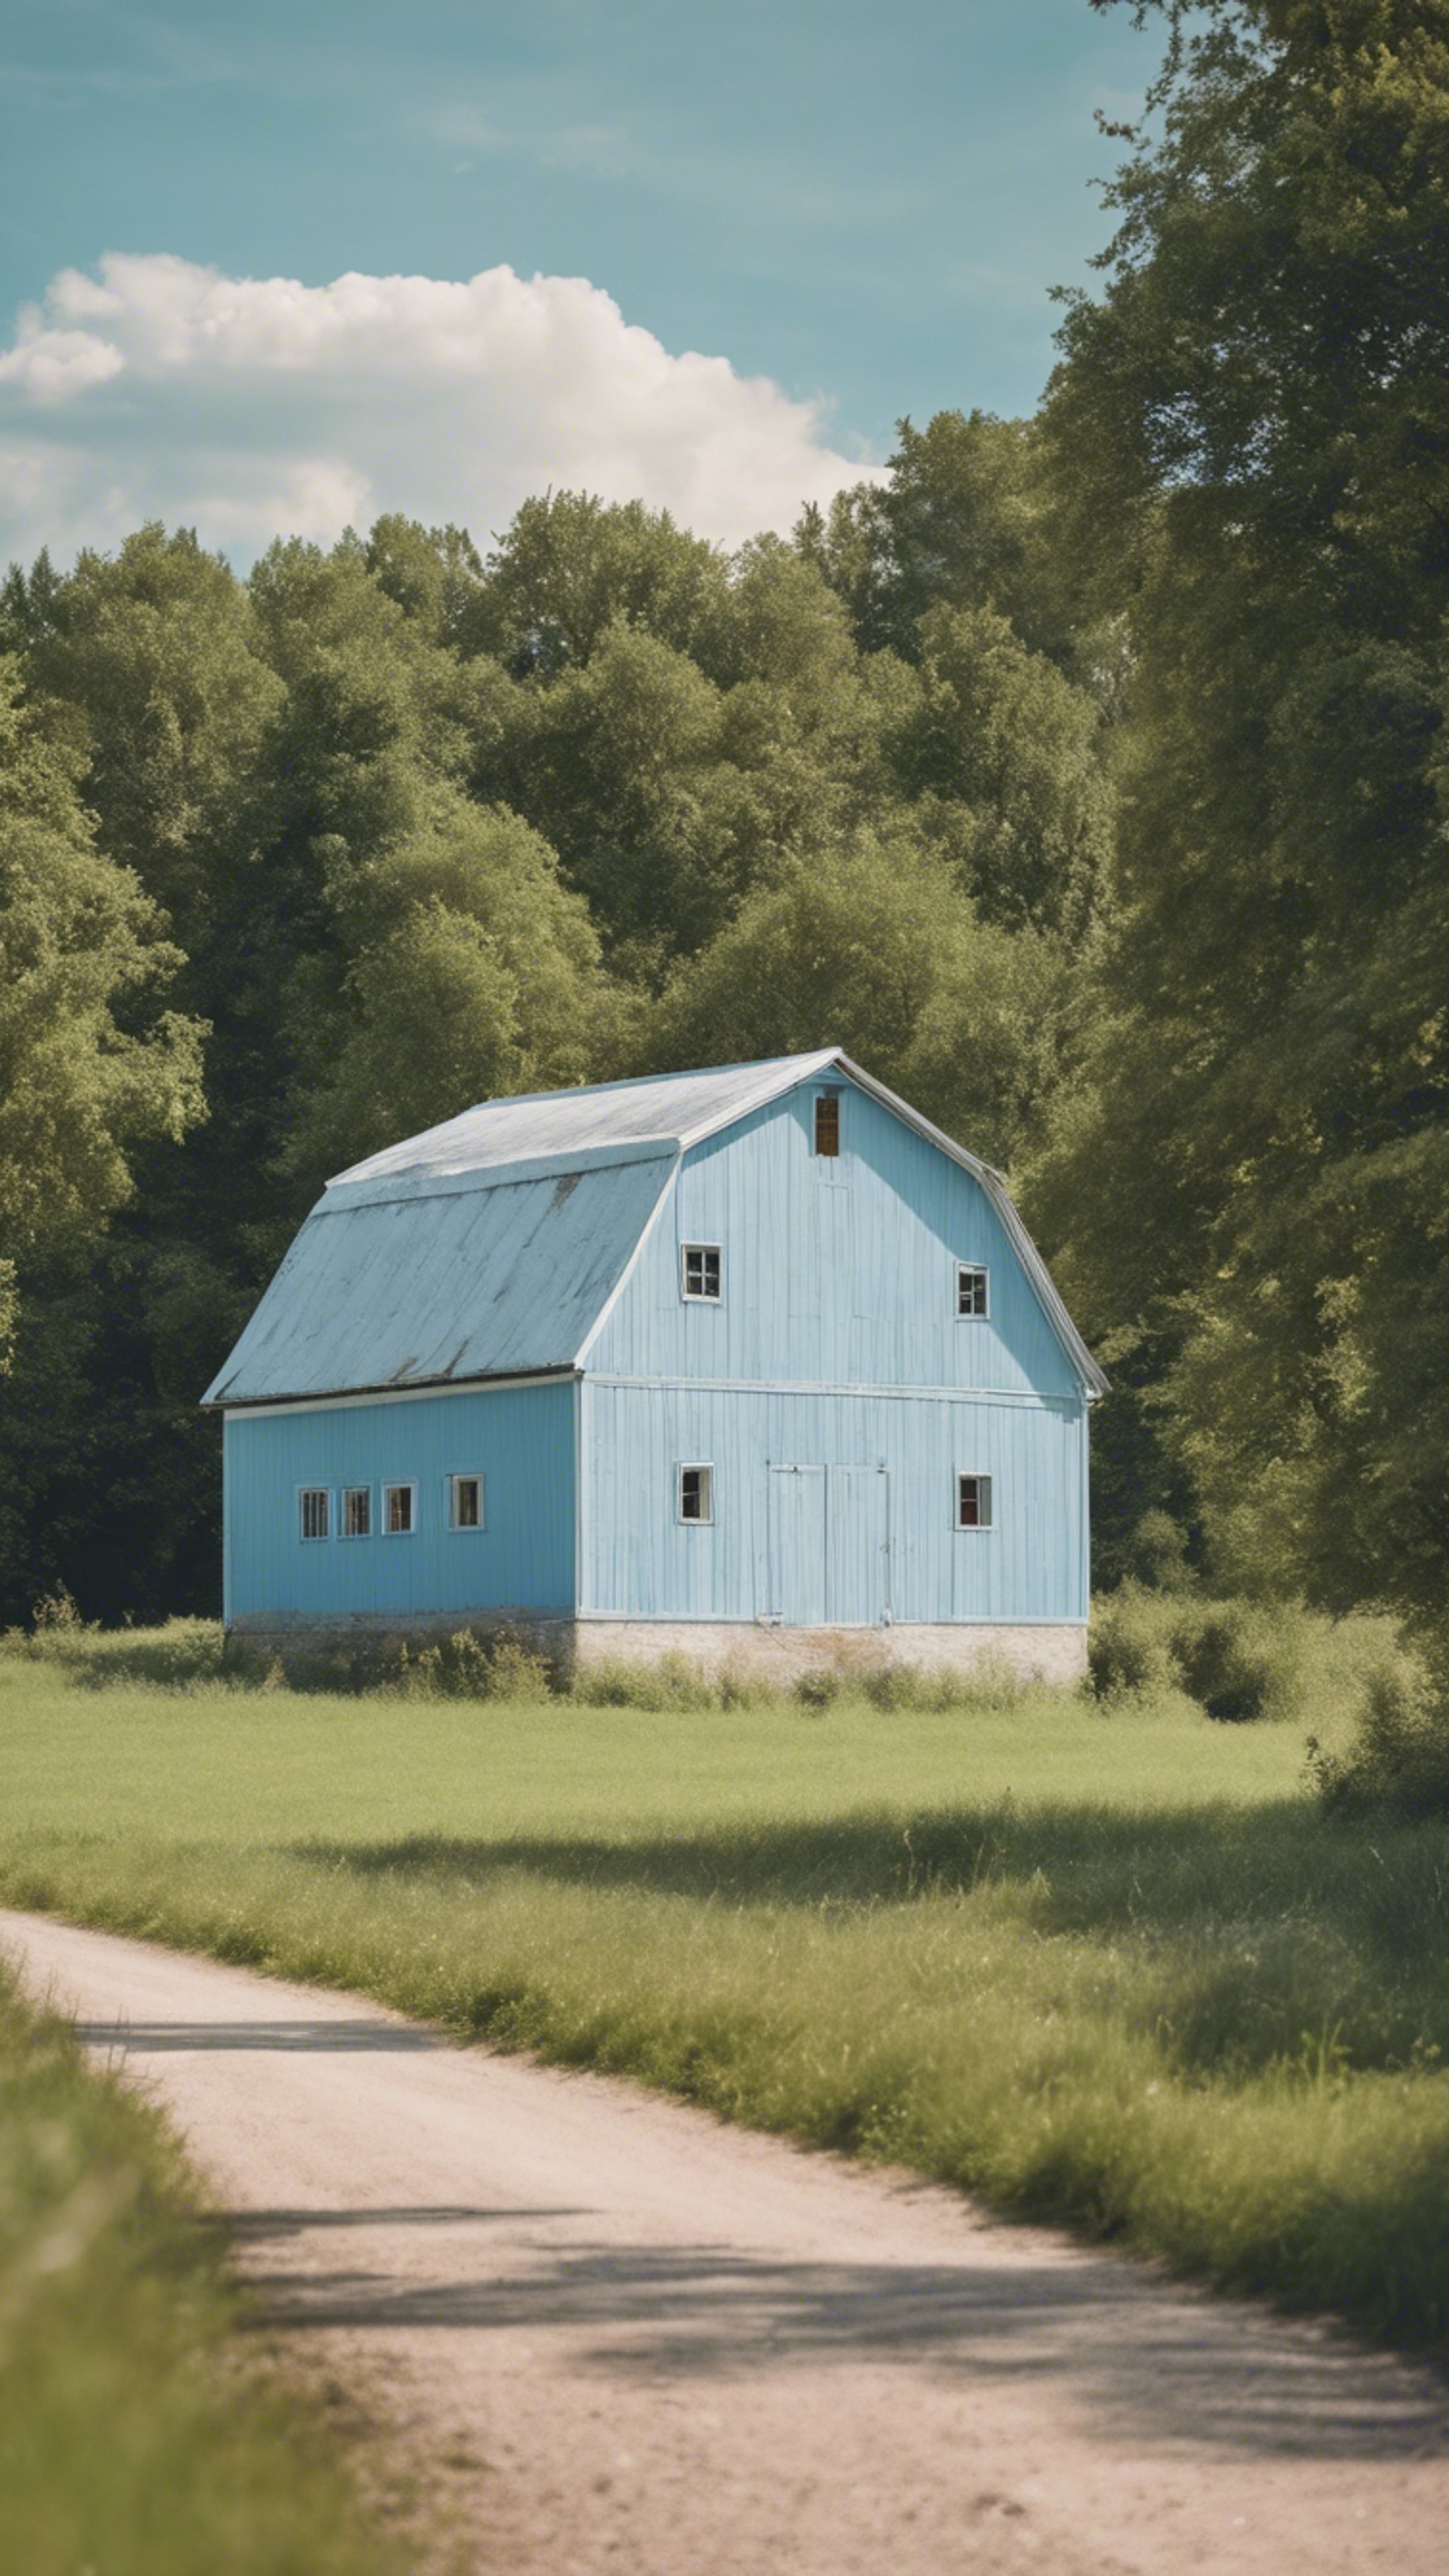 A pastel blue barn in a peaceful countryside during summertime.壁紙[a181e36d2ef548a99439]